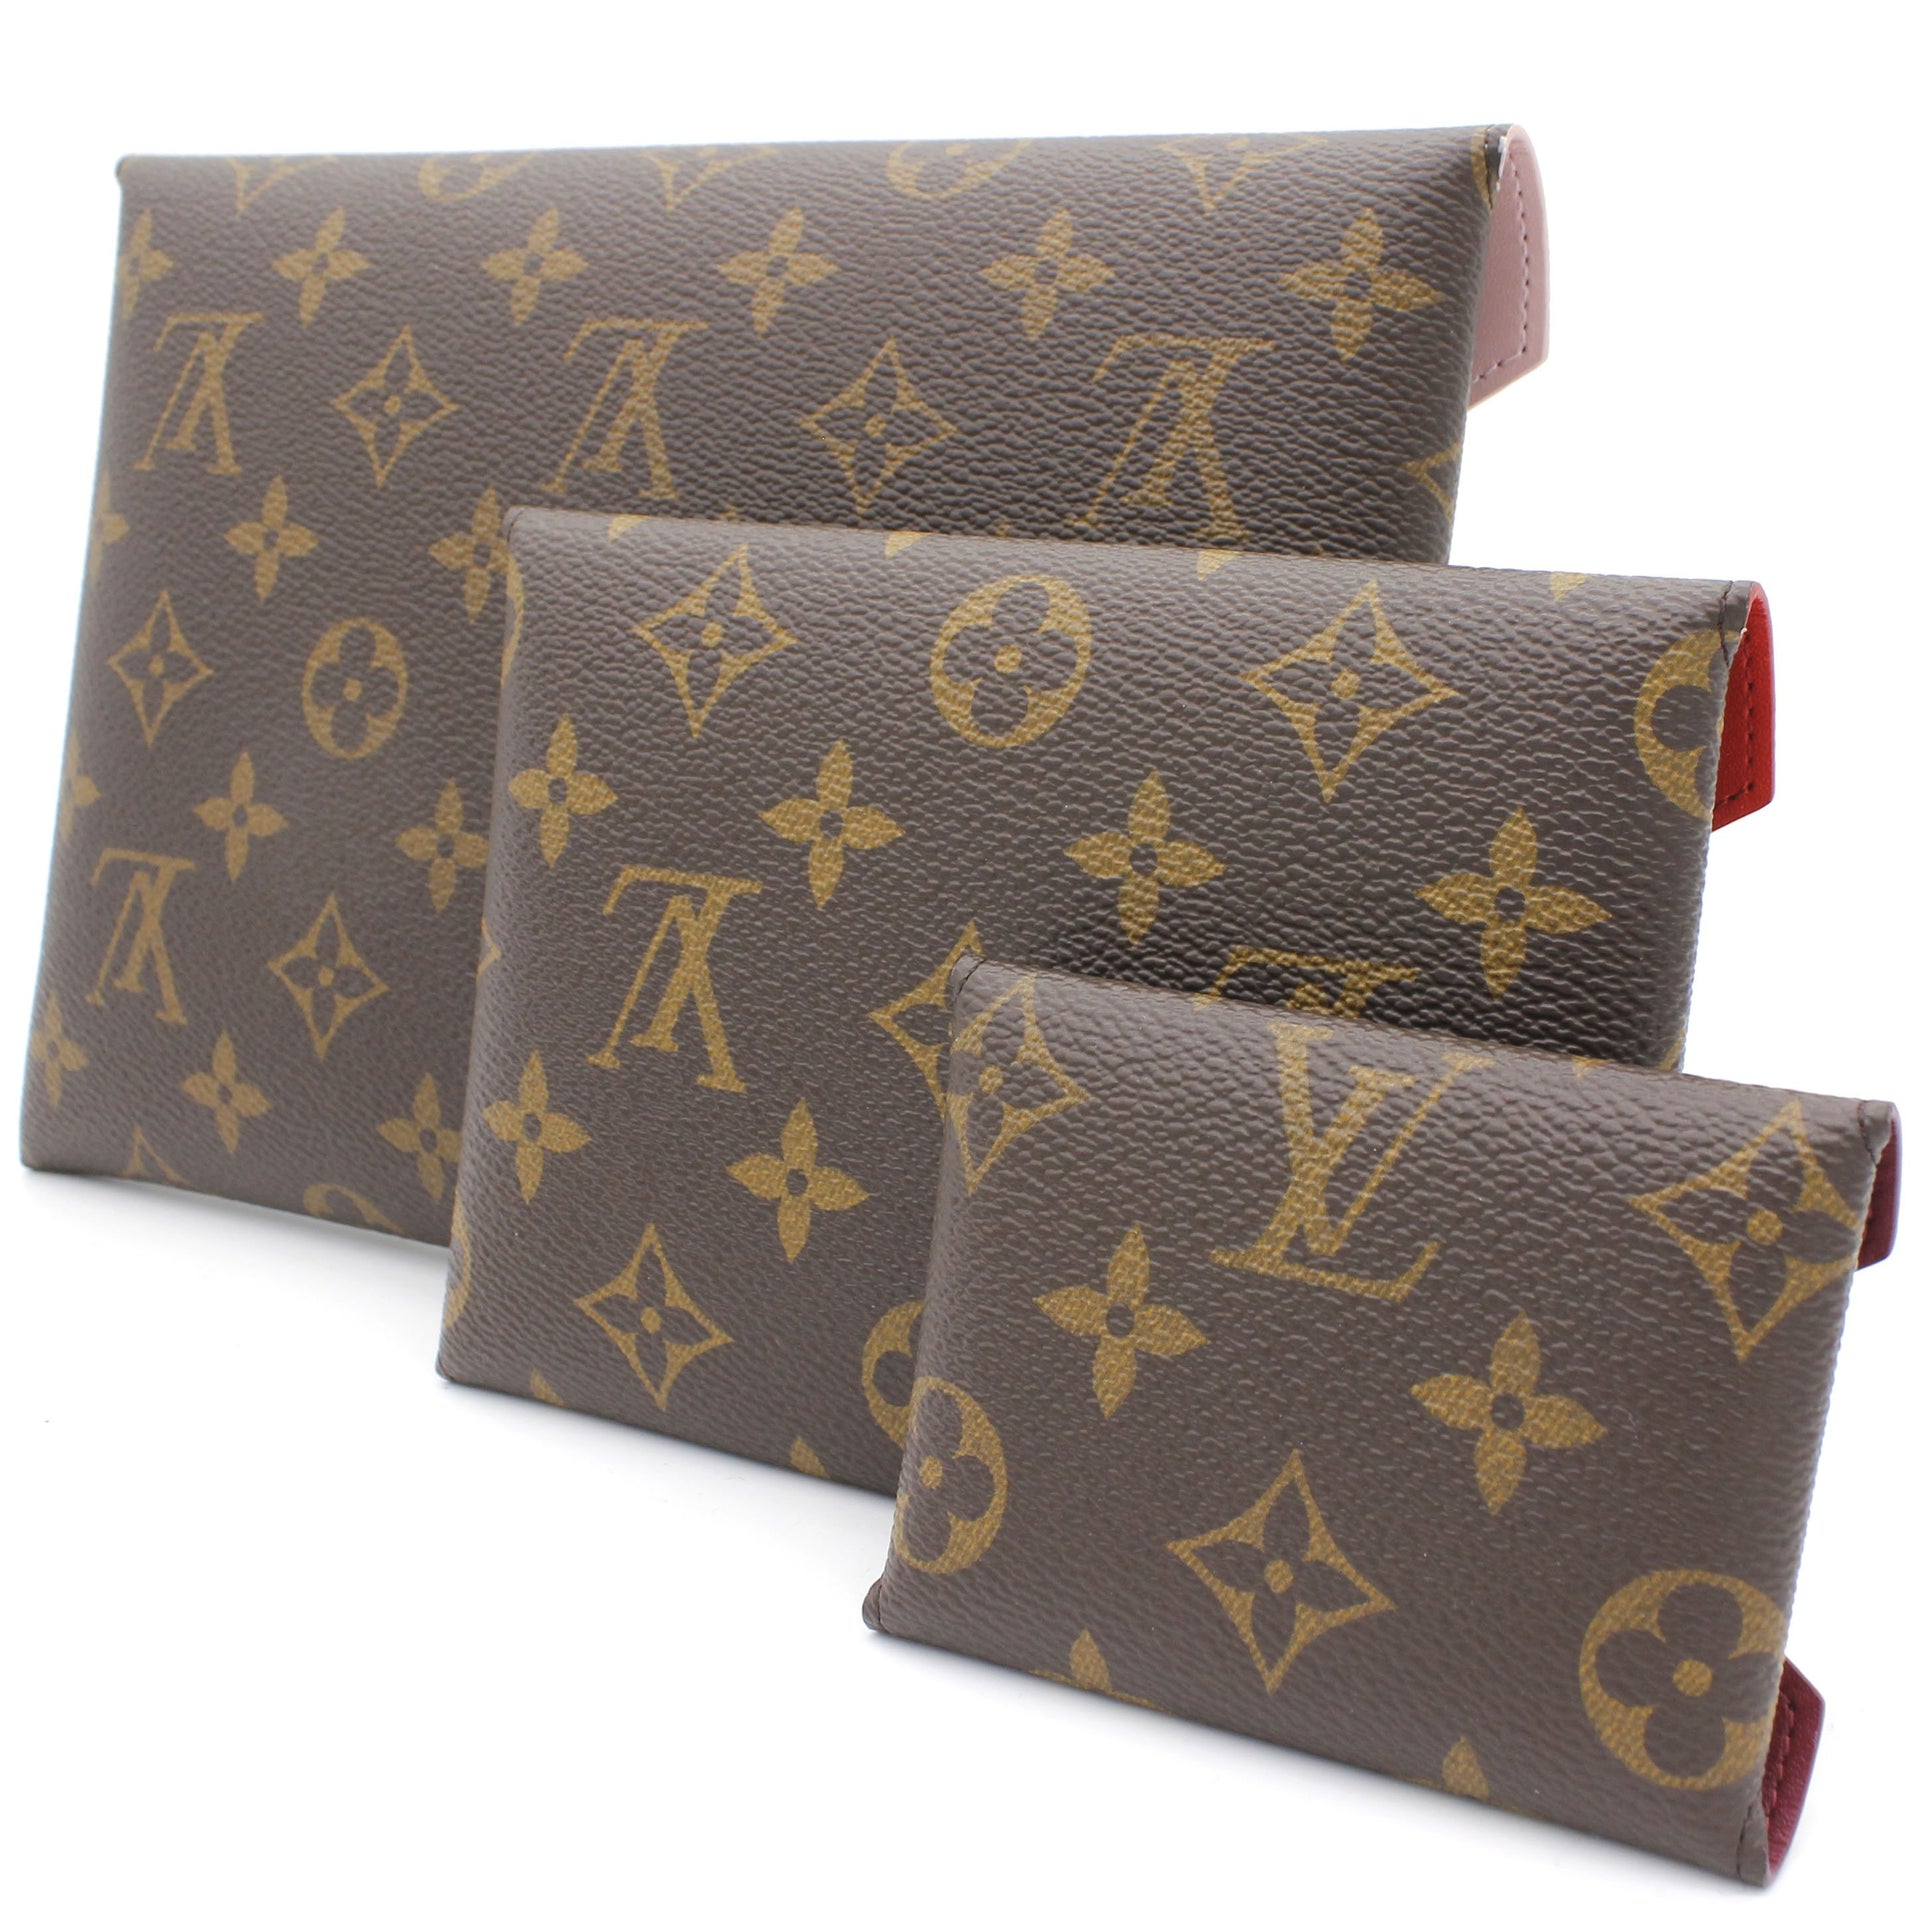 New Design Conversion Kit for LV Toiletry Pouch 26 / 19 Insert